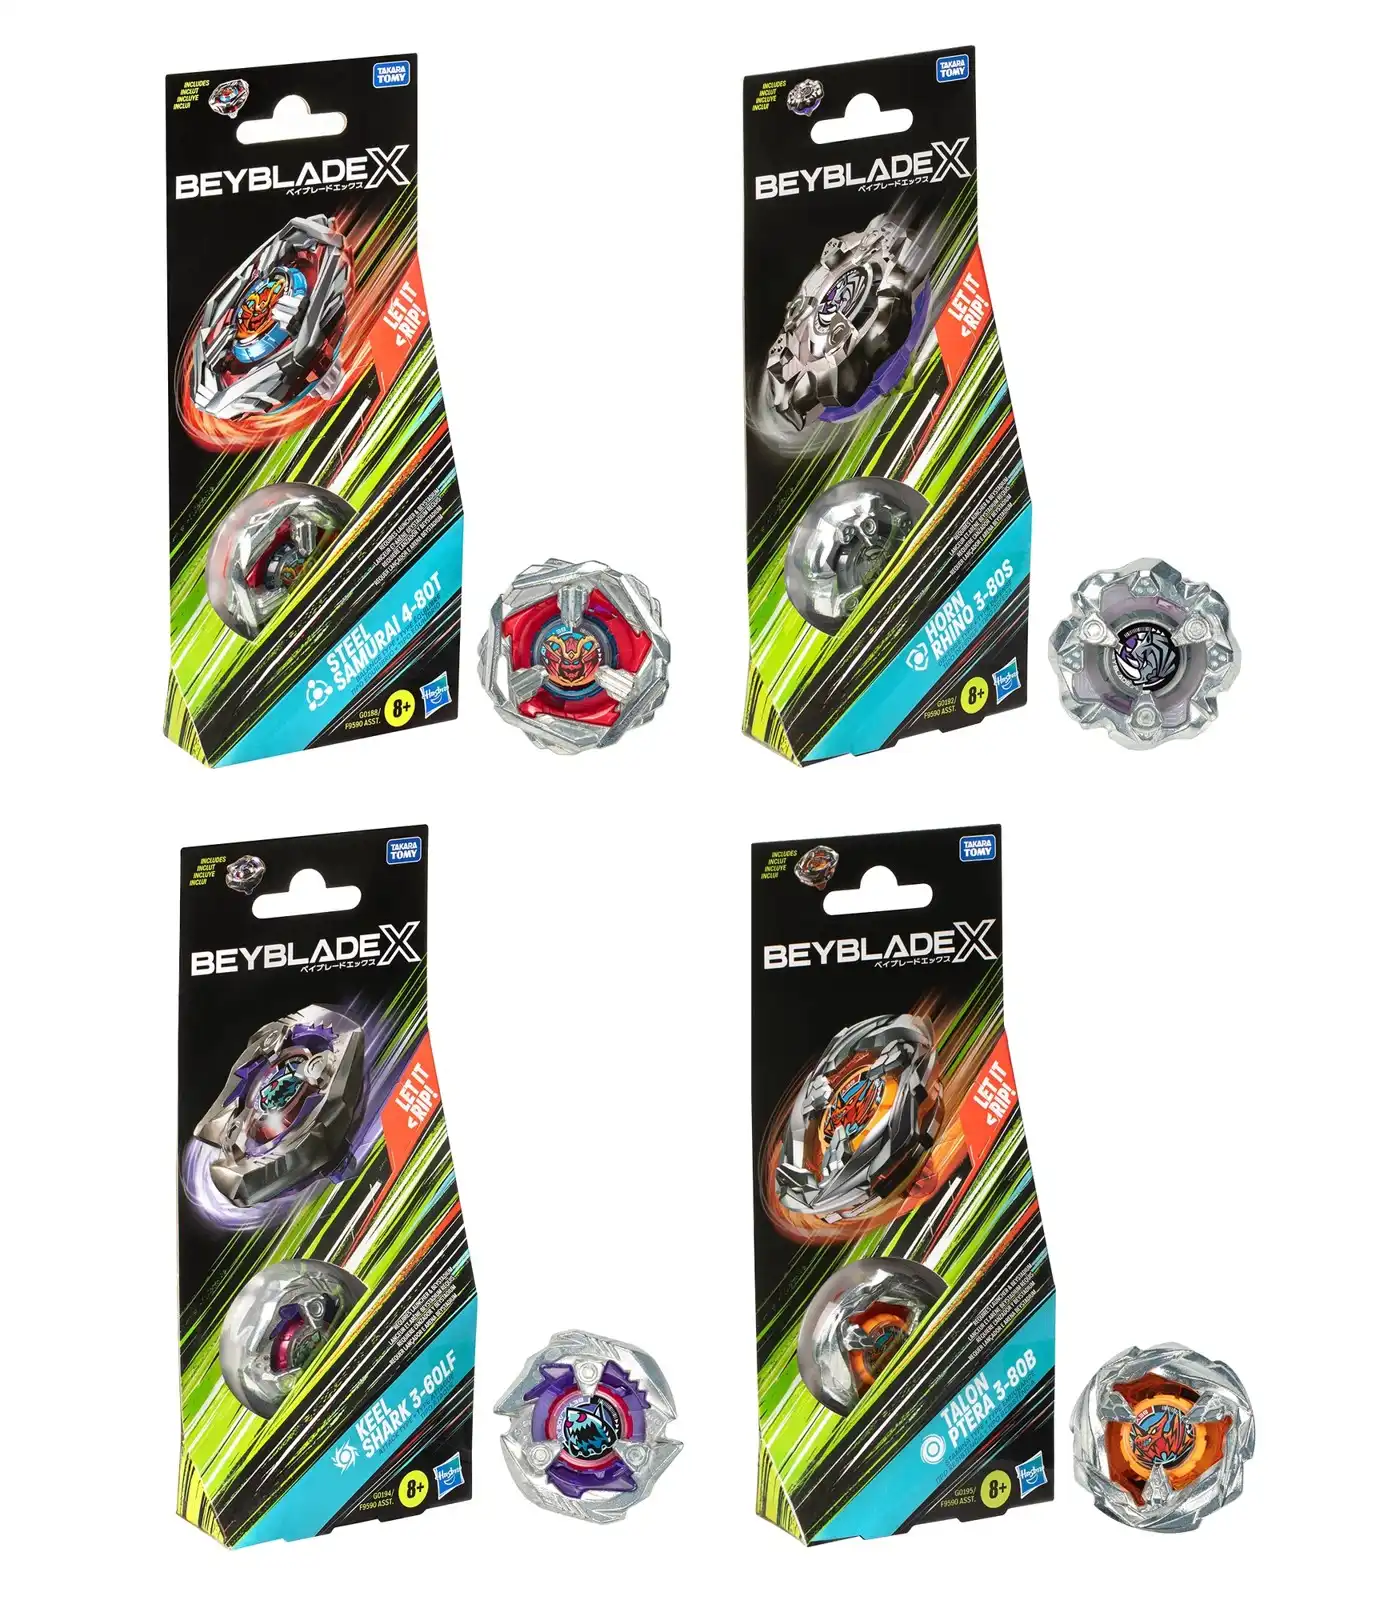 Beyblade X Booster Single Pack Assorted